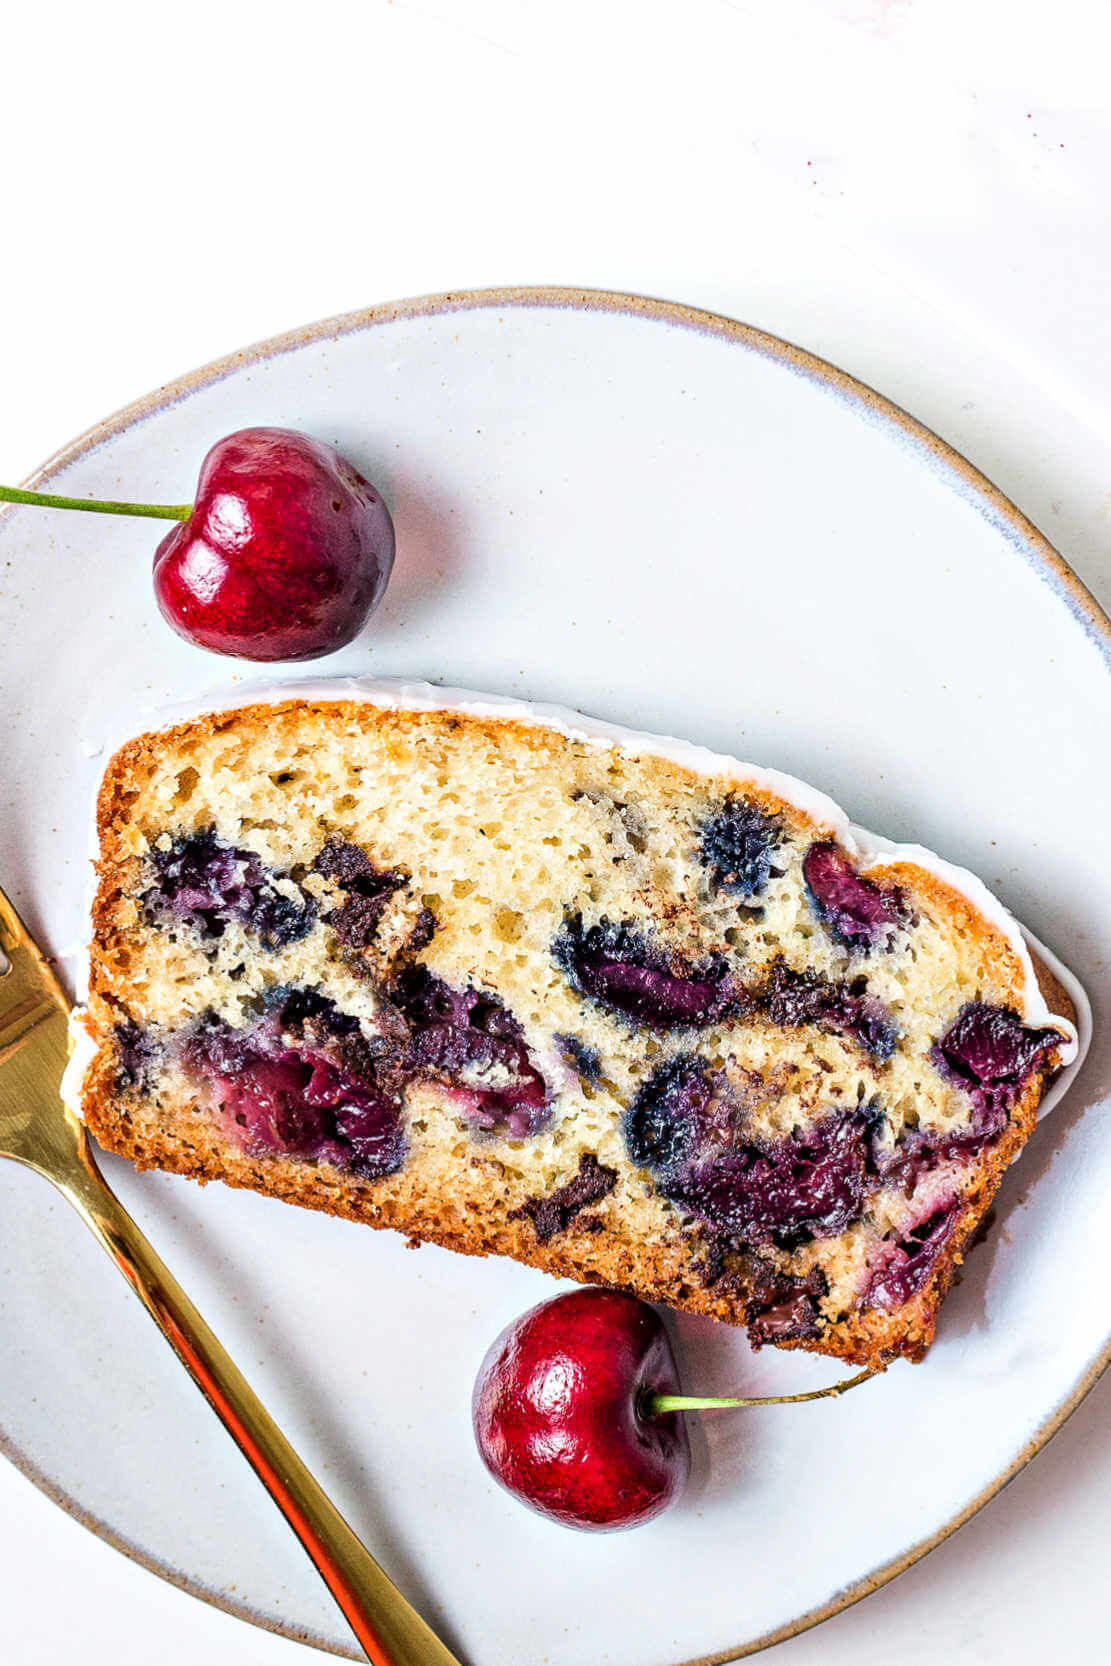 a slice of cherry bread on a serving plate with a fork and cherries.